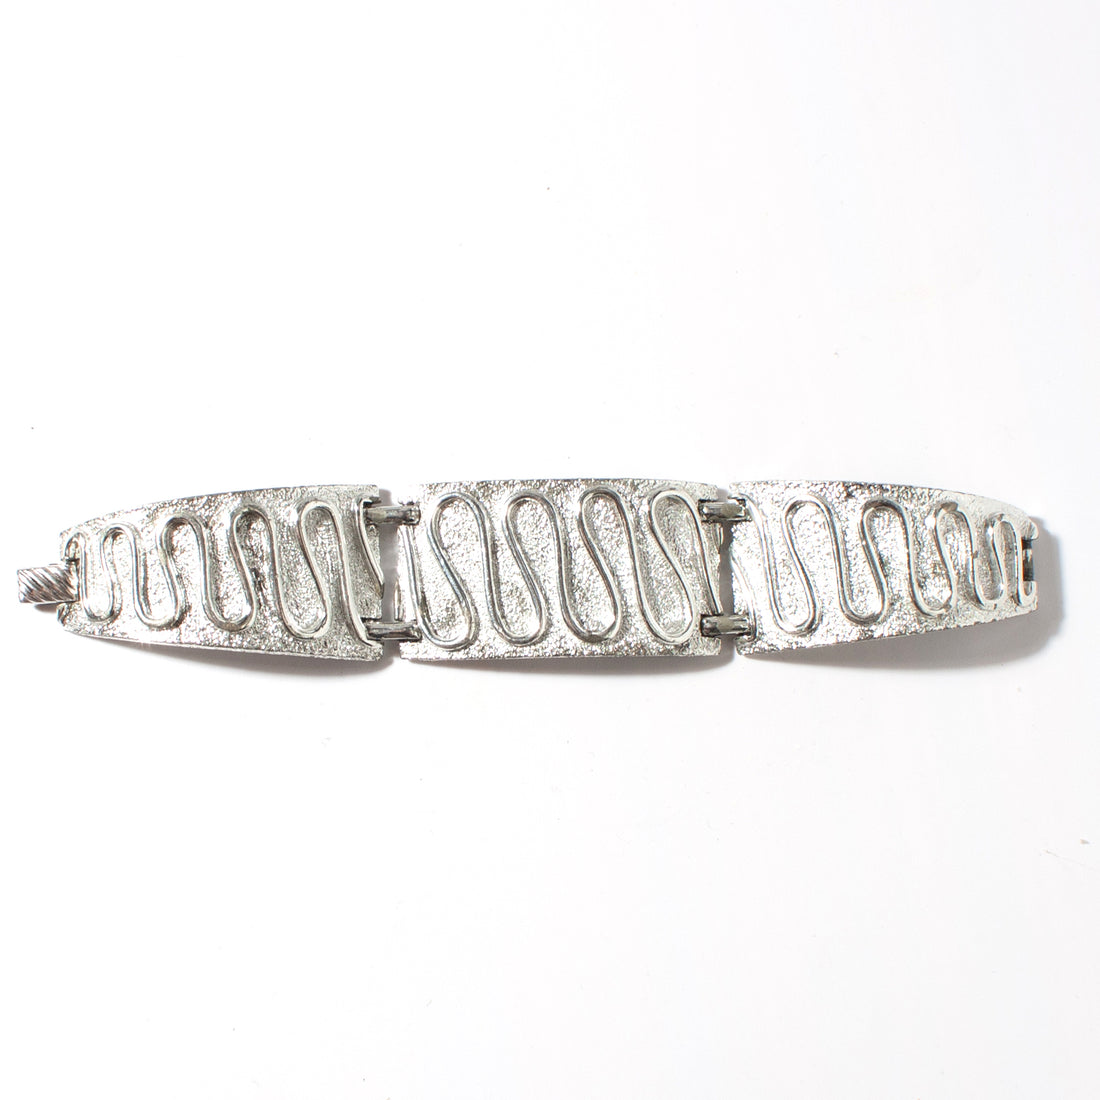 Decorative object - Silver toned Chain Bracelet from the Sarah Coventry  Jewellery Range c. 1970s-1980s